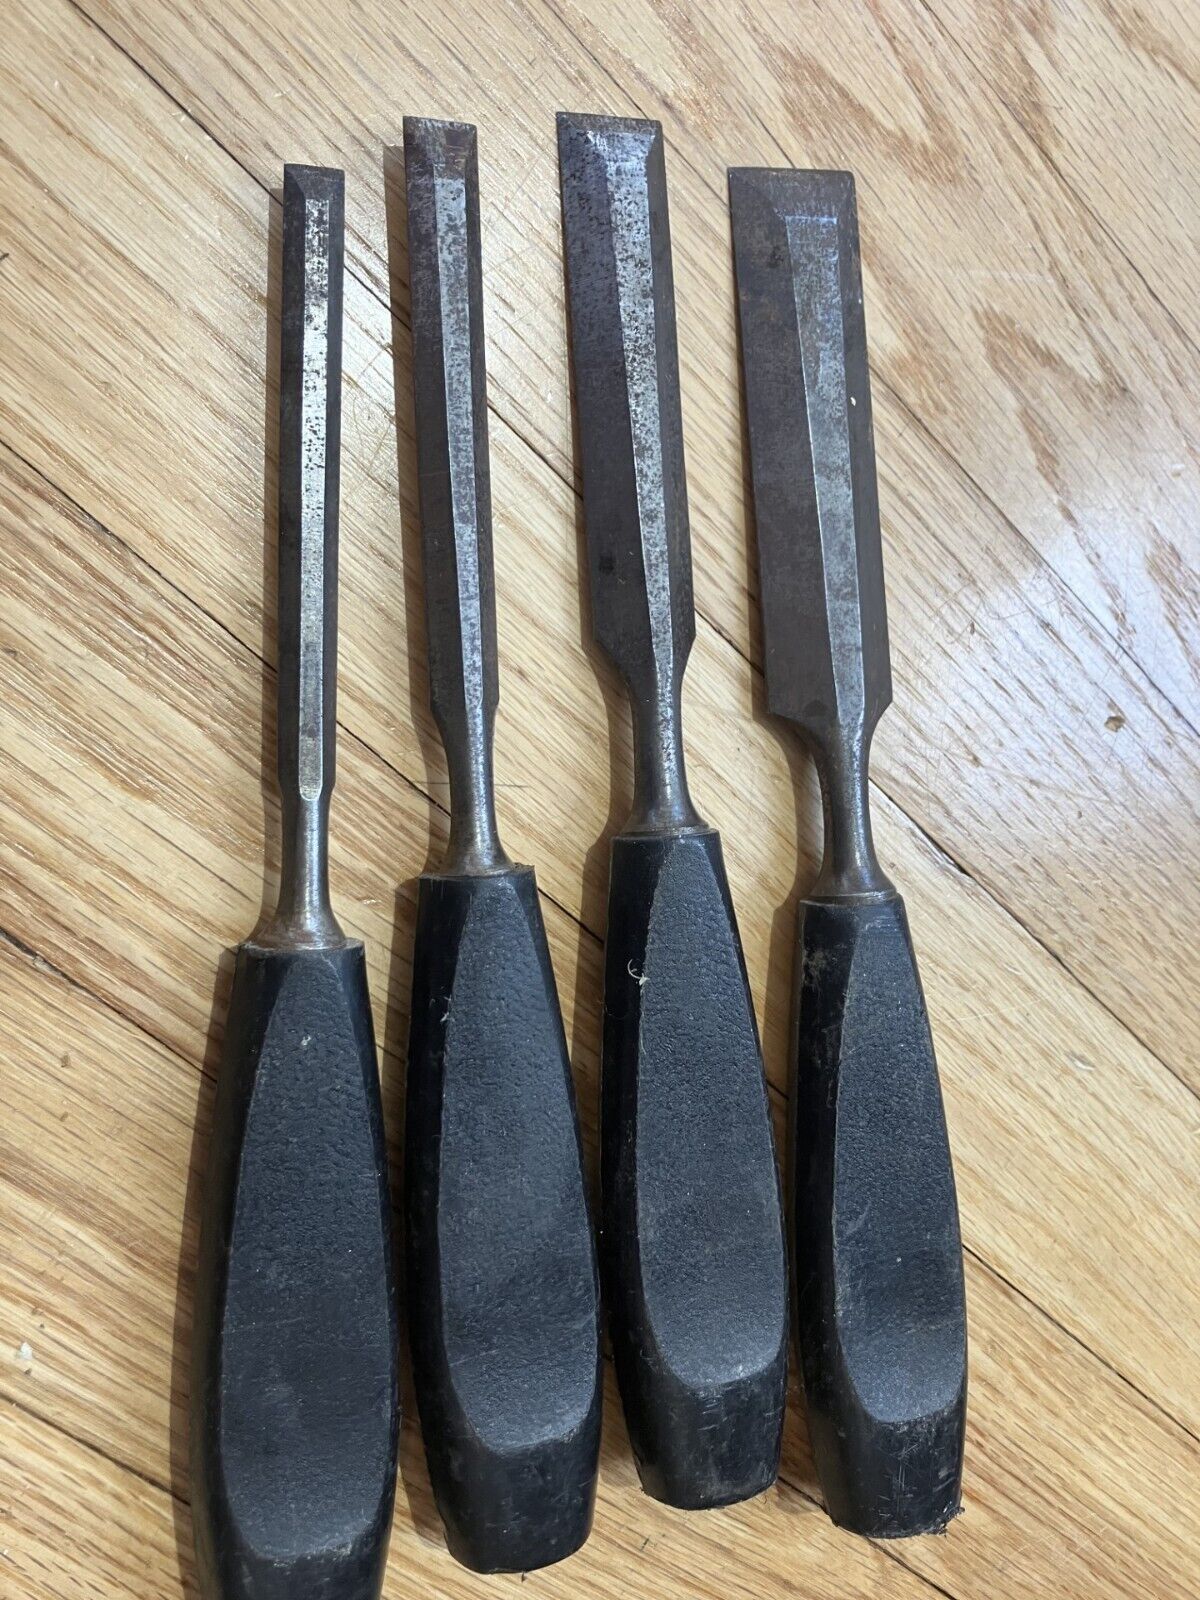 Vintage Chisels (Made in Brazil) Arax